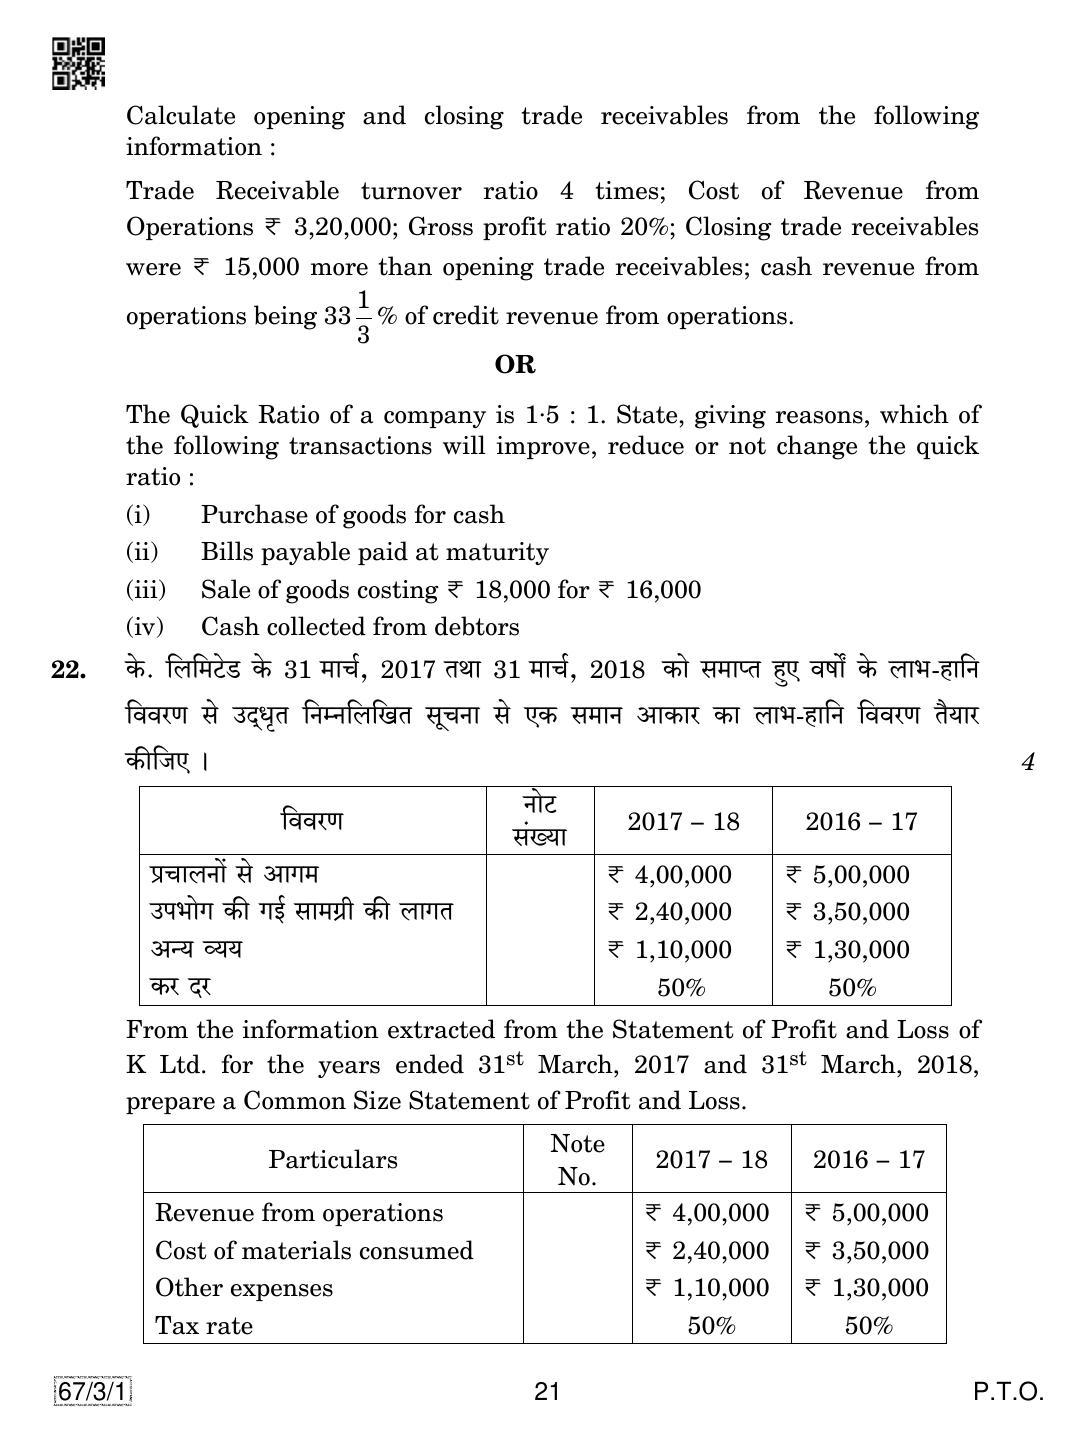 CBSE Class 12 67-3-1 Accountancy 2019 Question Paper - Page 21